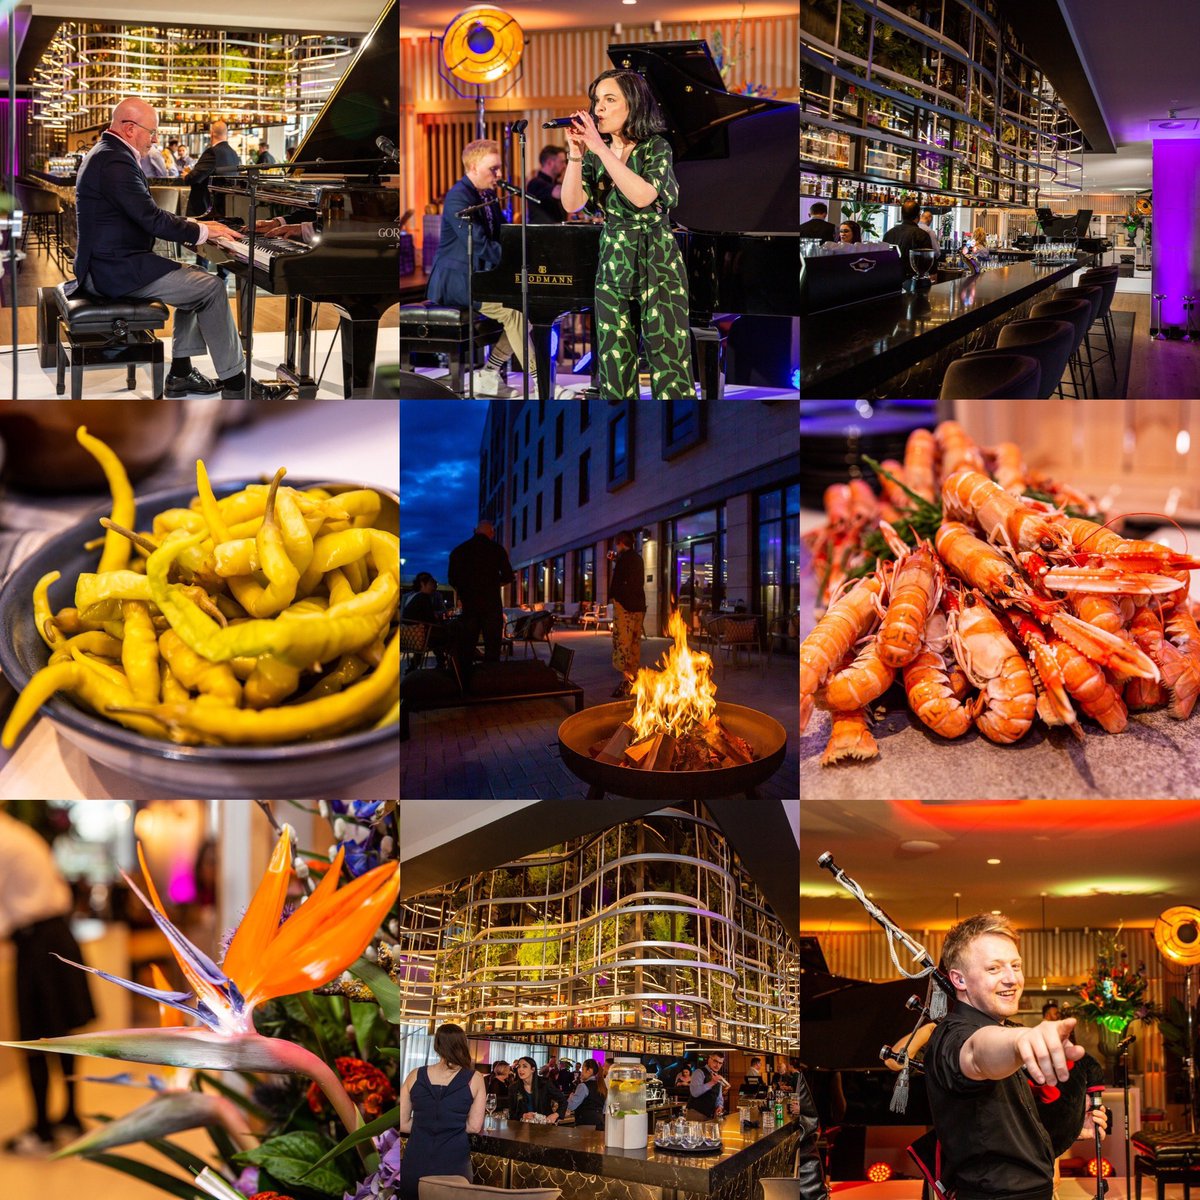 The lovely AC Marriott launch in Inverness this week… #ACMarriott #ACMarriotInverness #thehighlands #Scotland #PRimeEventManagement #visitscotland #visitinverness #visitinvernesslochness #visitthehighlands